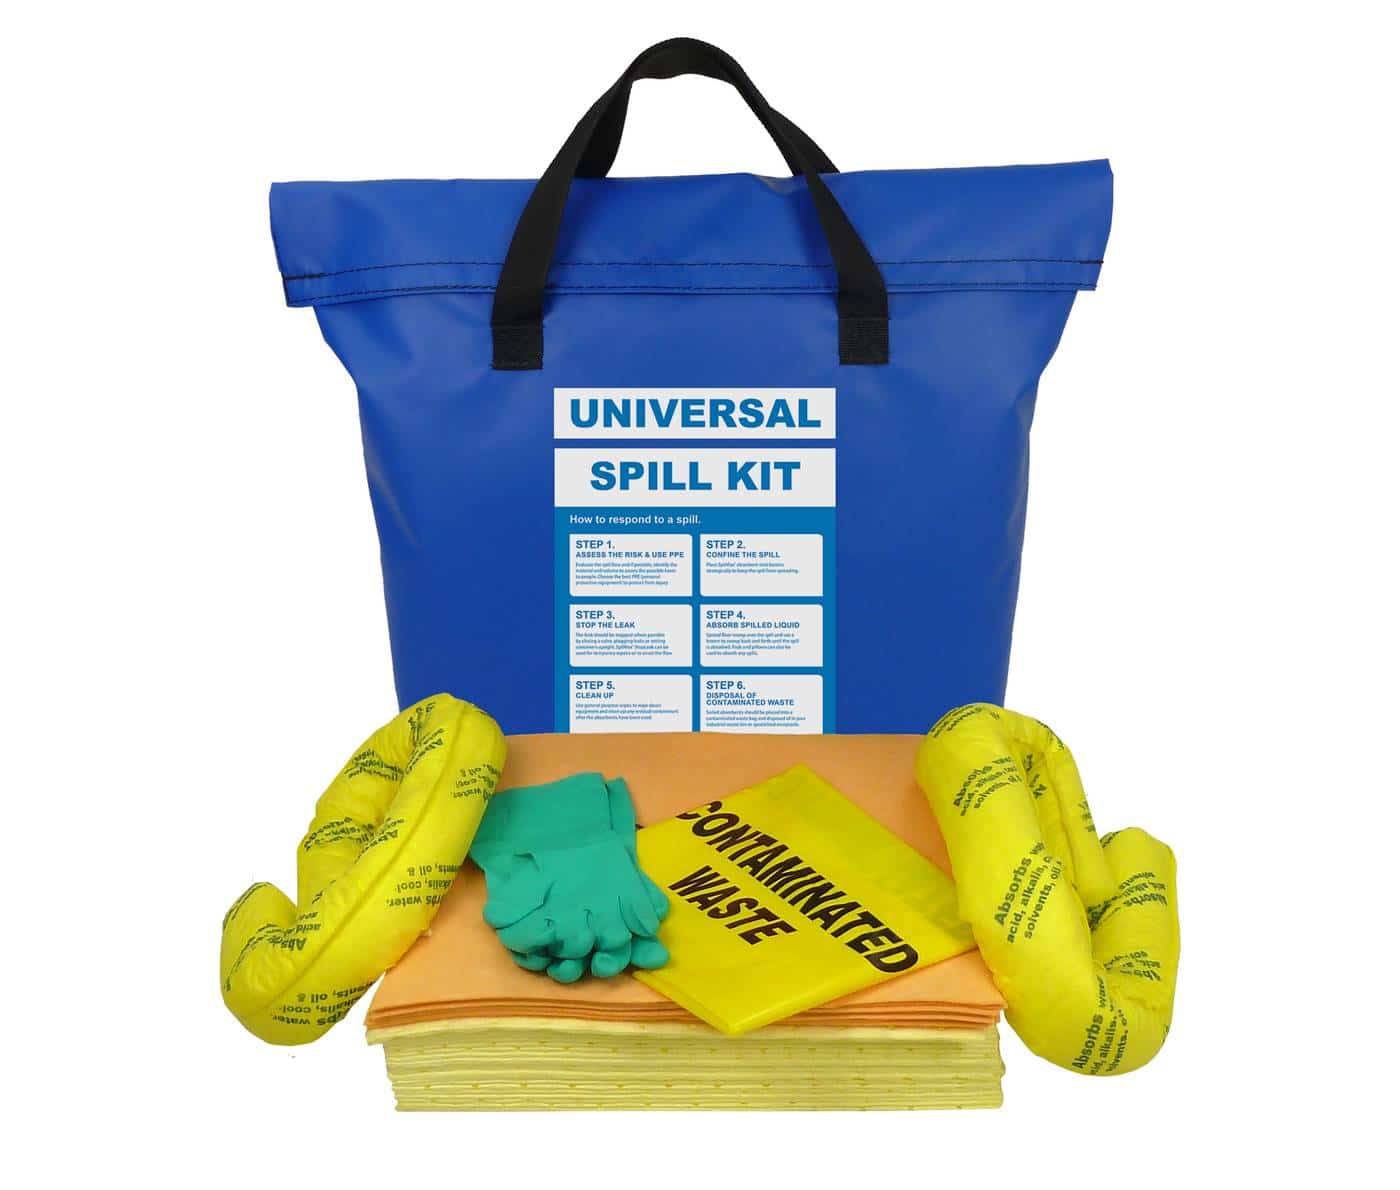 SpilMax 50L Universal Vehicle Spill Kit Bag with contents showing